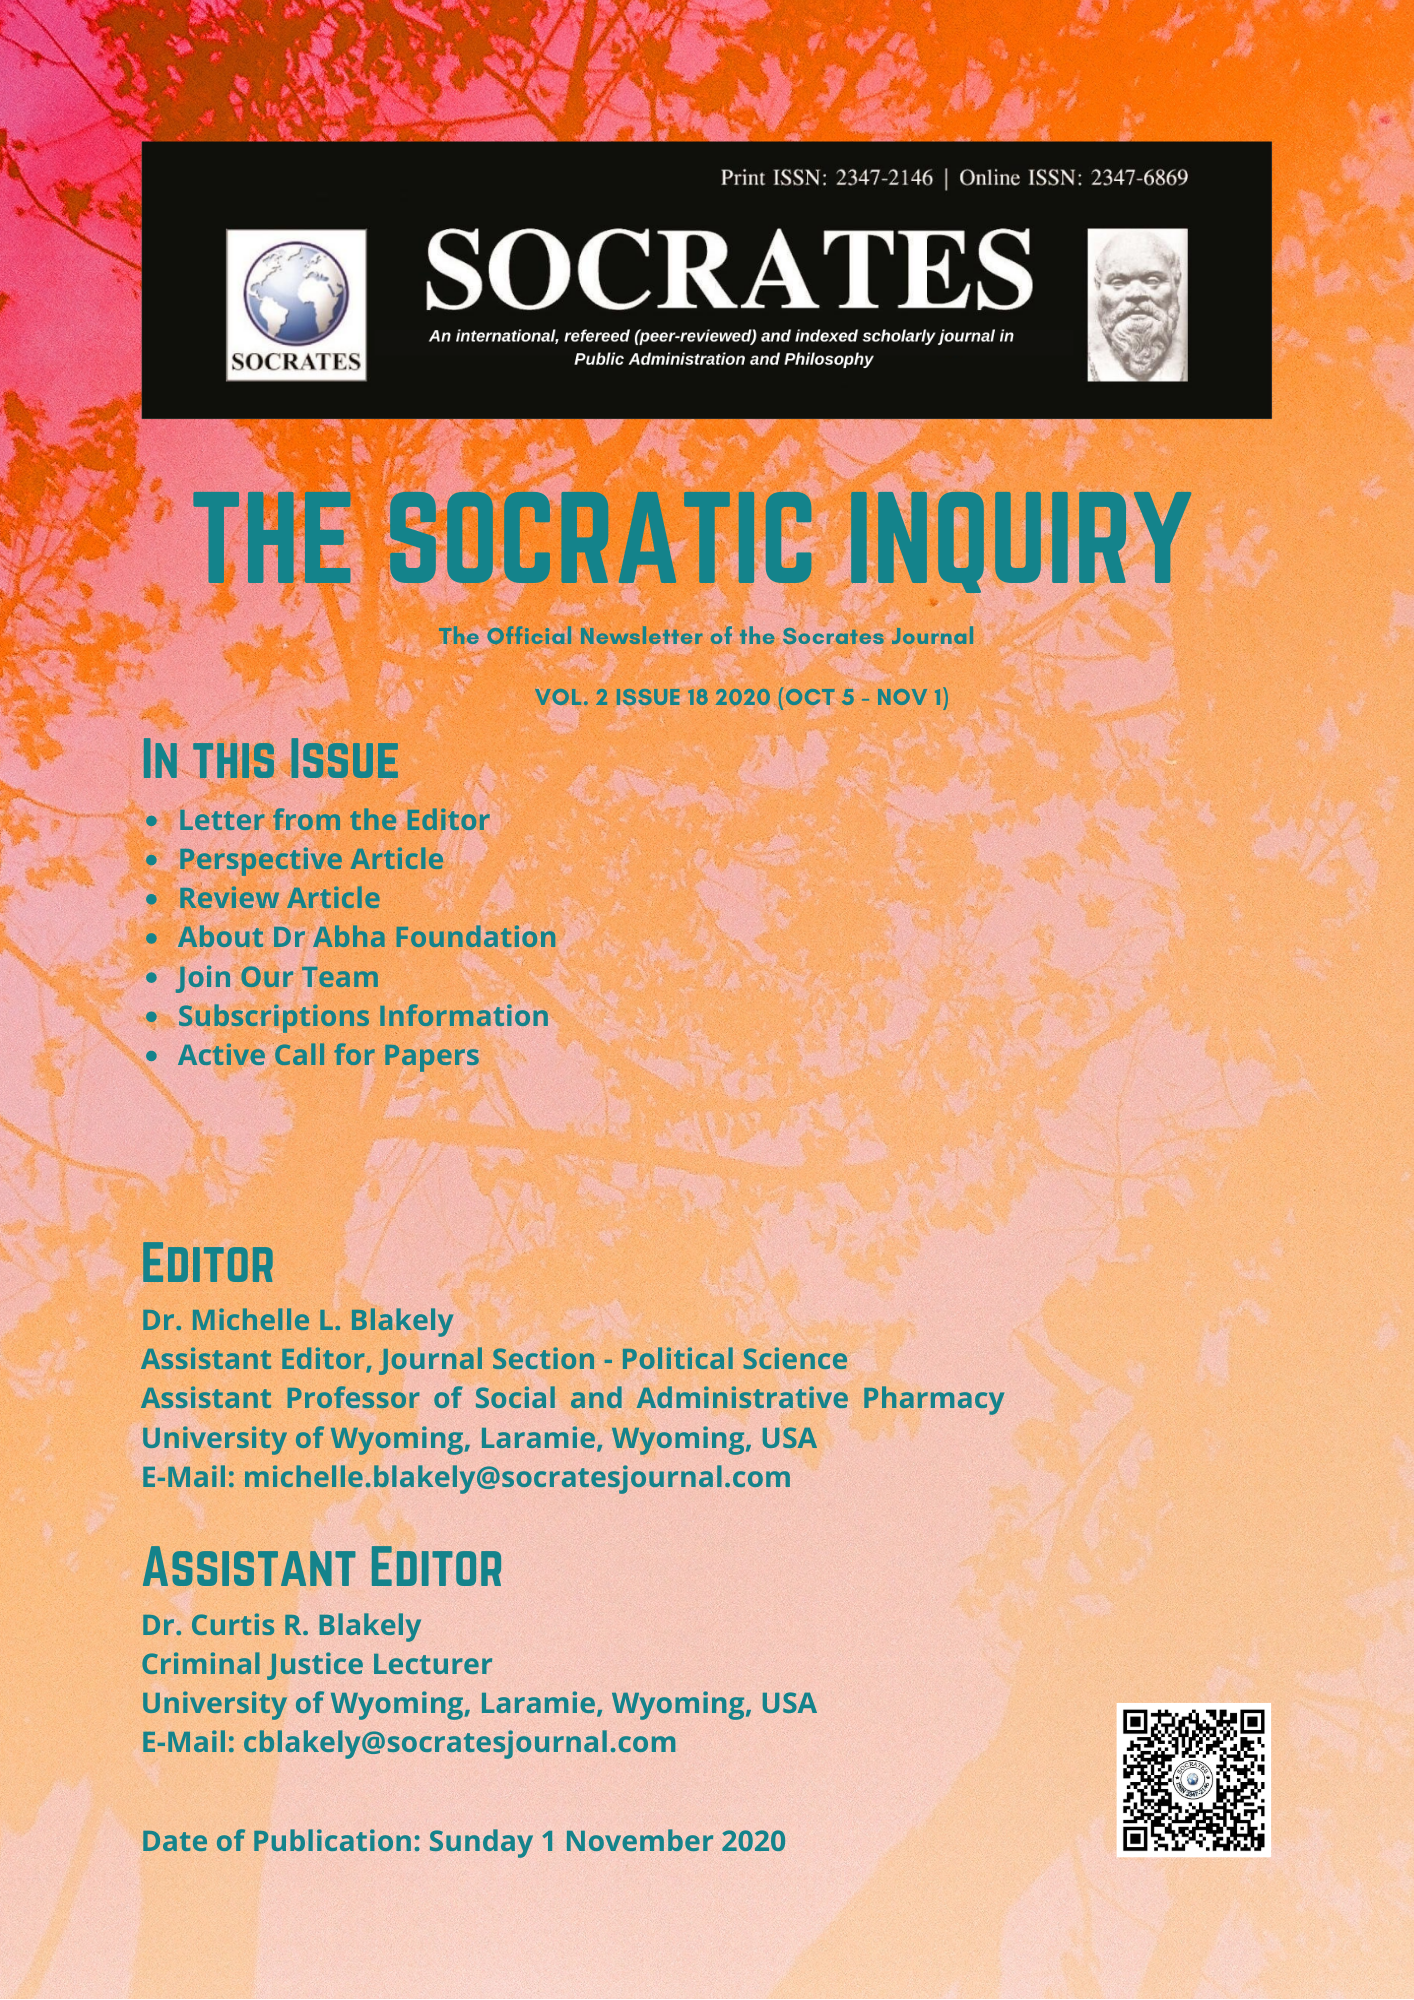 The Socratic Inquiry Newsletter Vol 2 Issue 18 (2020)